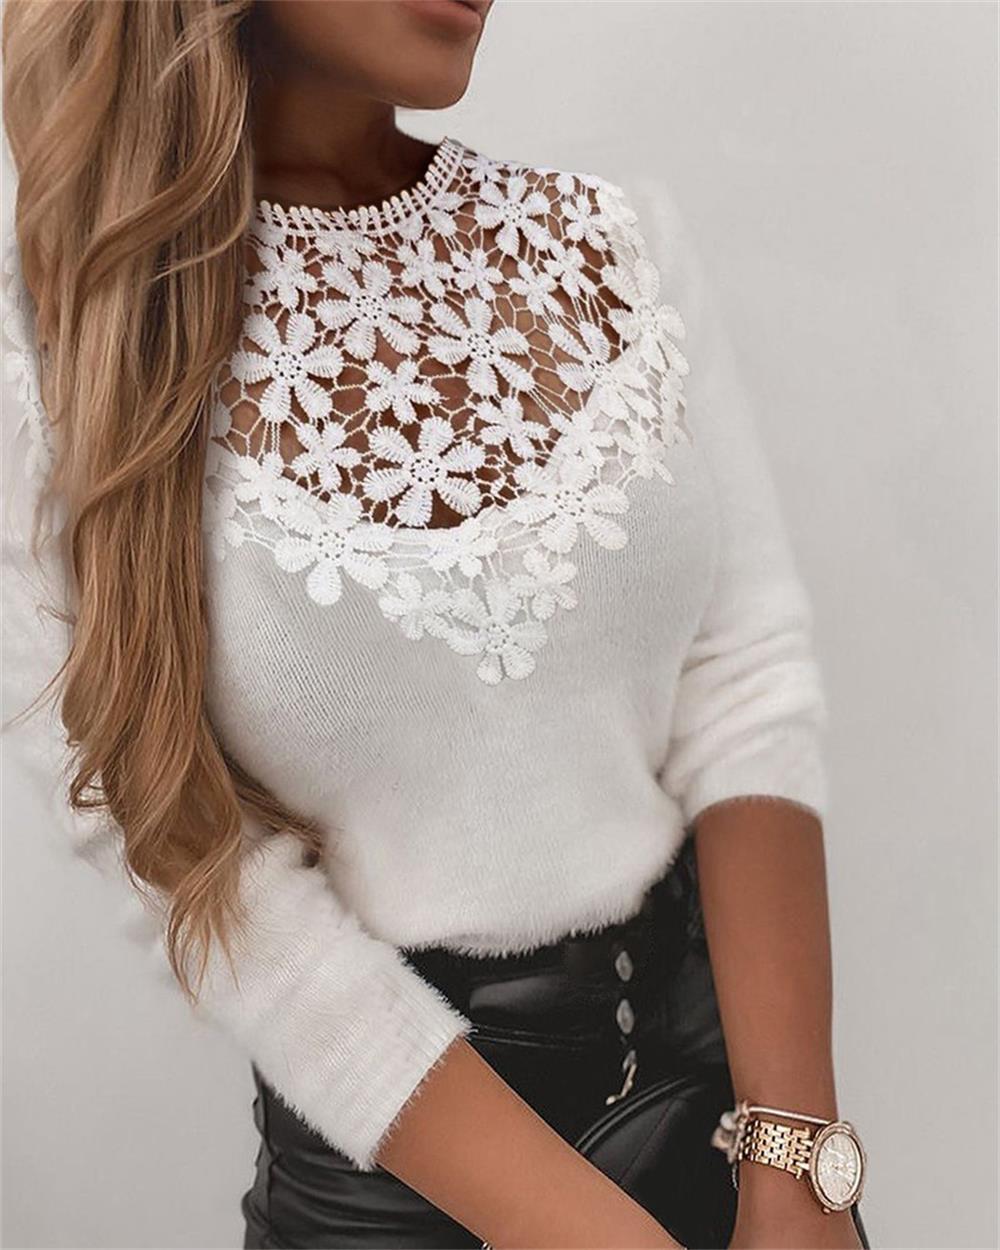 Women's Casual Eyelash Lace Sweater, Solid Color Long-sleeved Top, Tight High Neck Plush Blouse